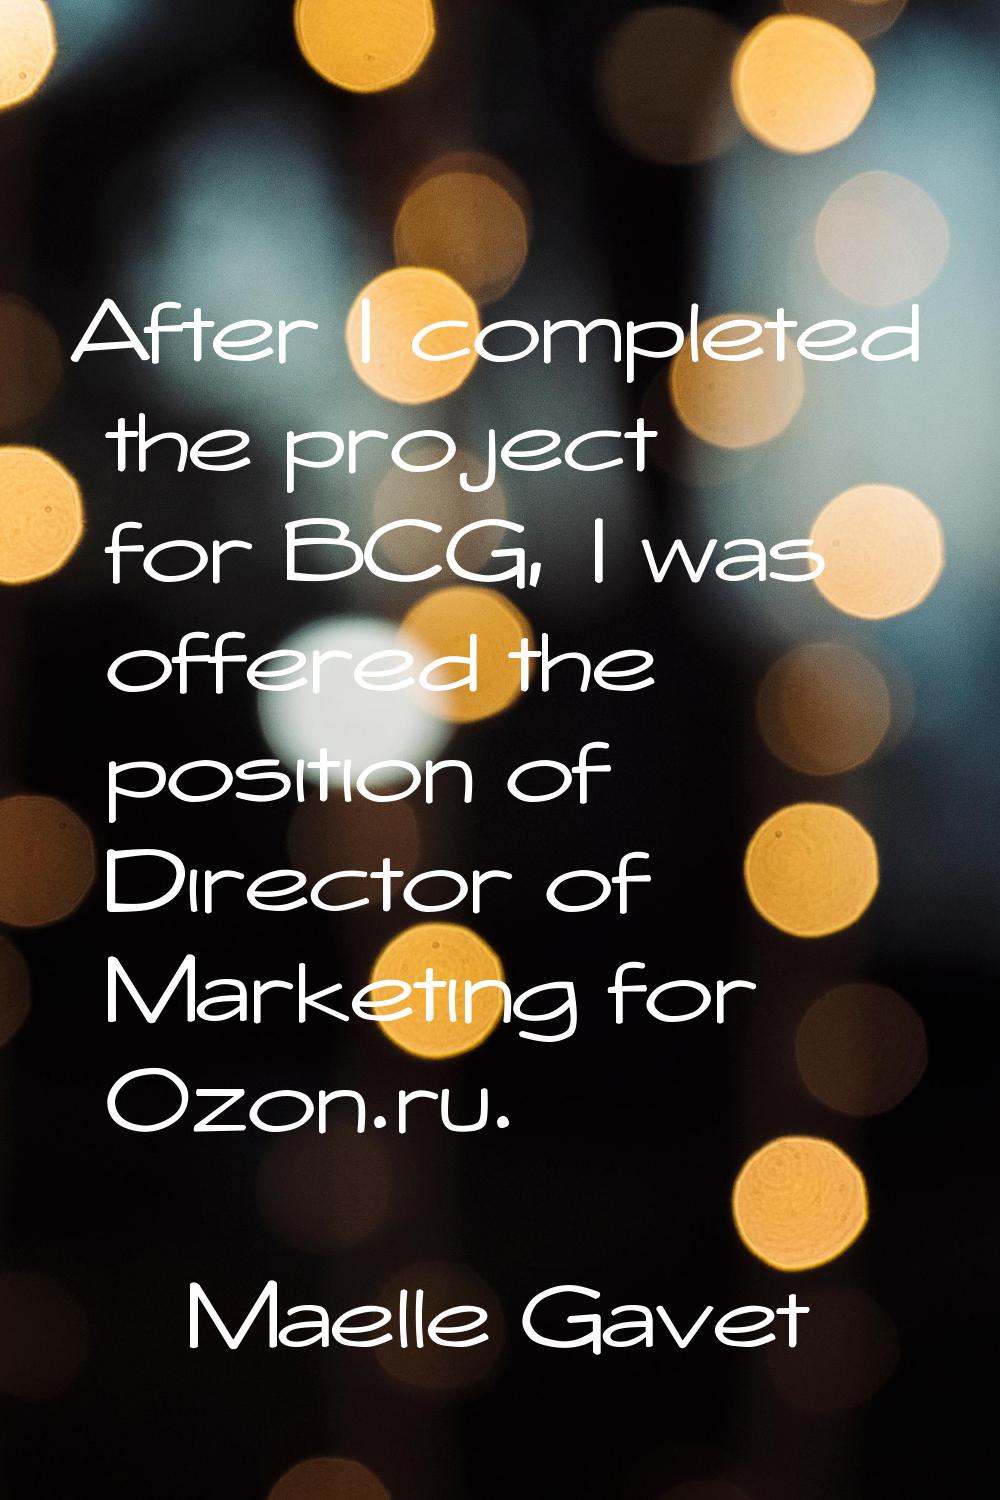 After I completed the project for BCG, I was offered the position of Director of Marketing for Ozon